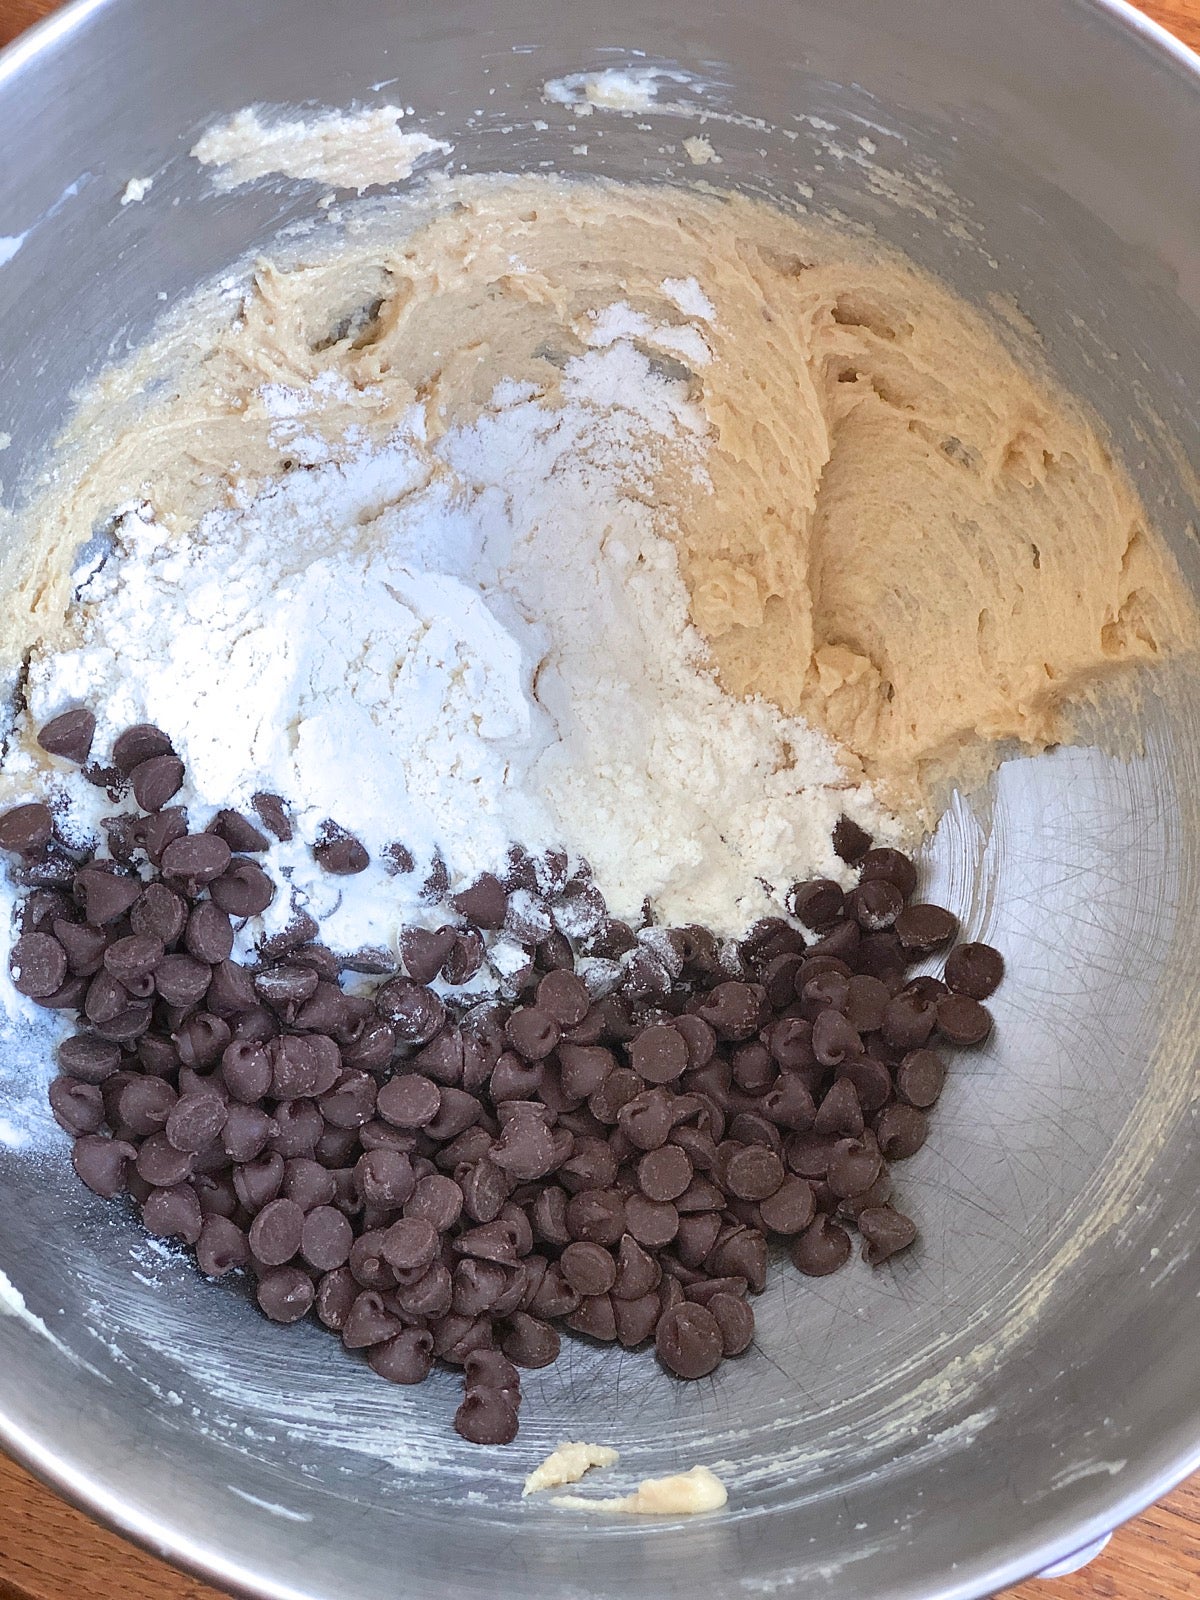 Miing flour and chocolate chips into the remaining dough for chocolate chip cookies.